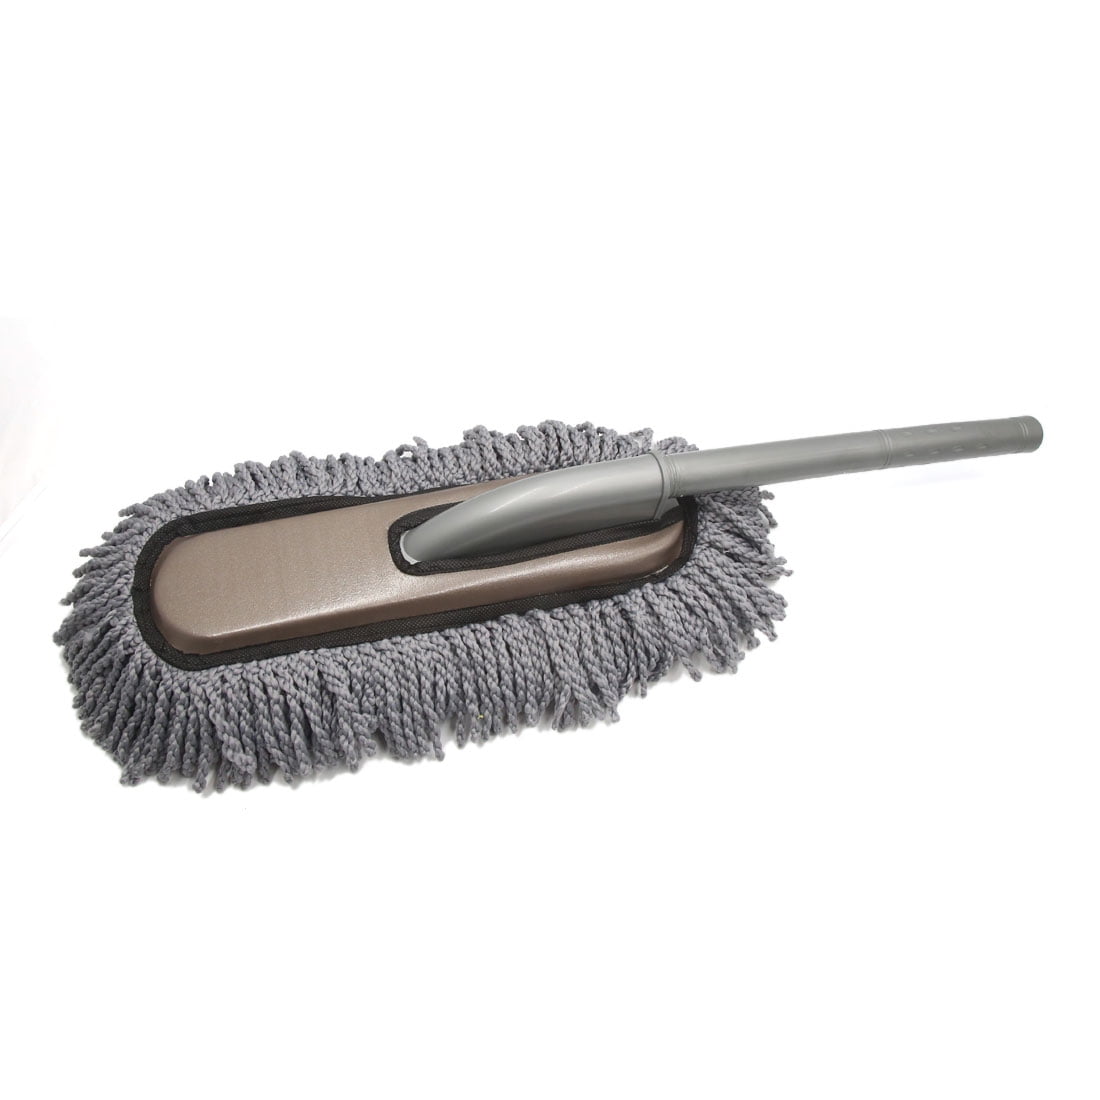 Car Dust Cleaning Brush Duster Mop Auto Duster Washer Tool Microfiber 